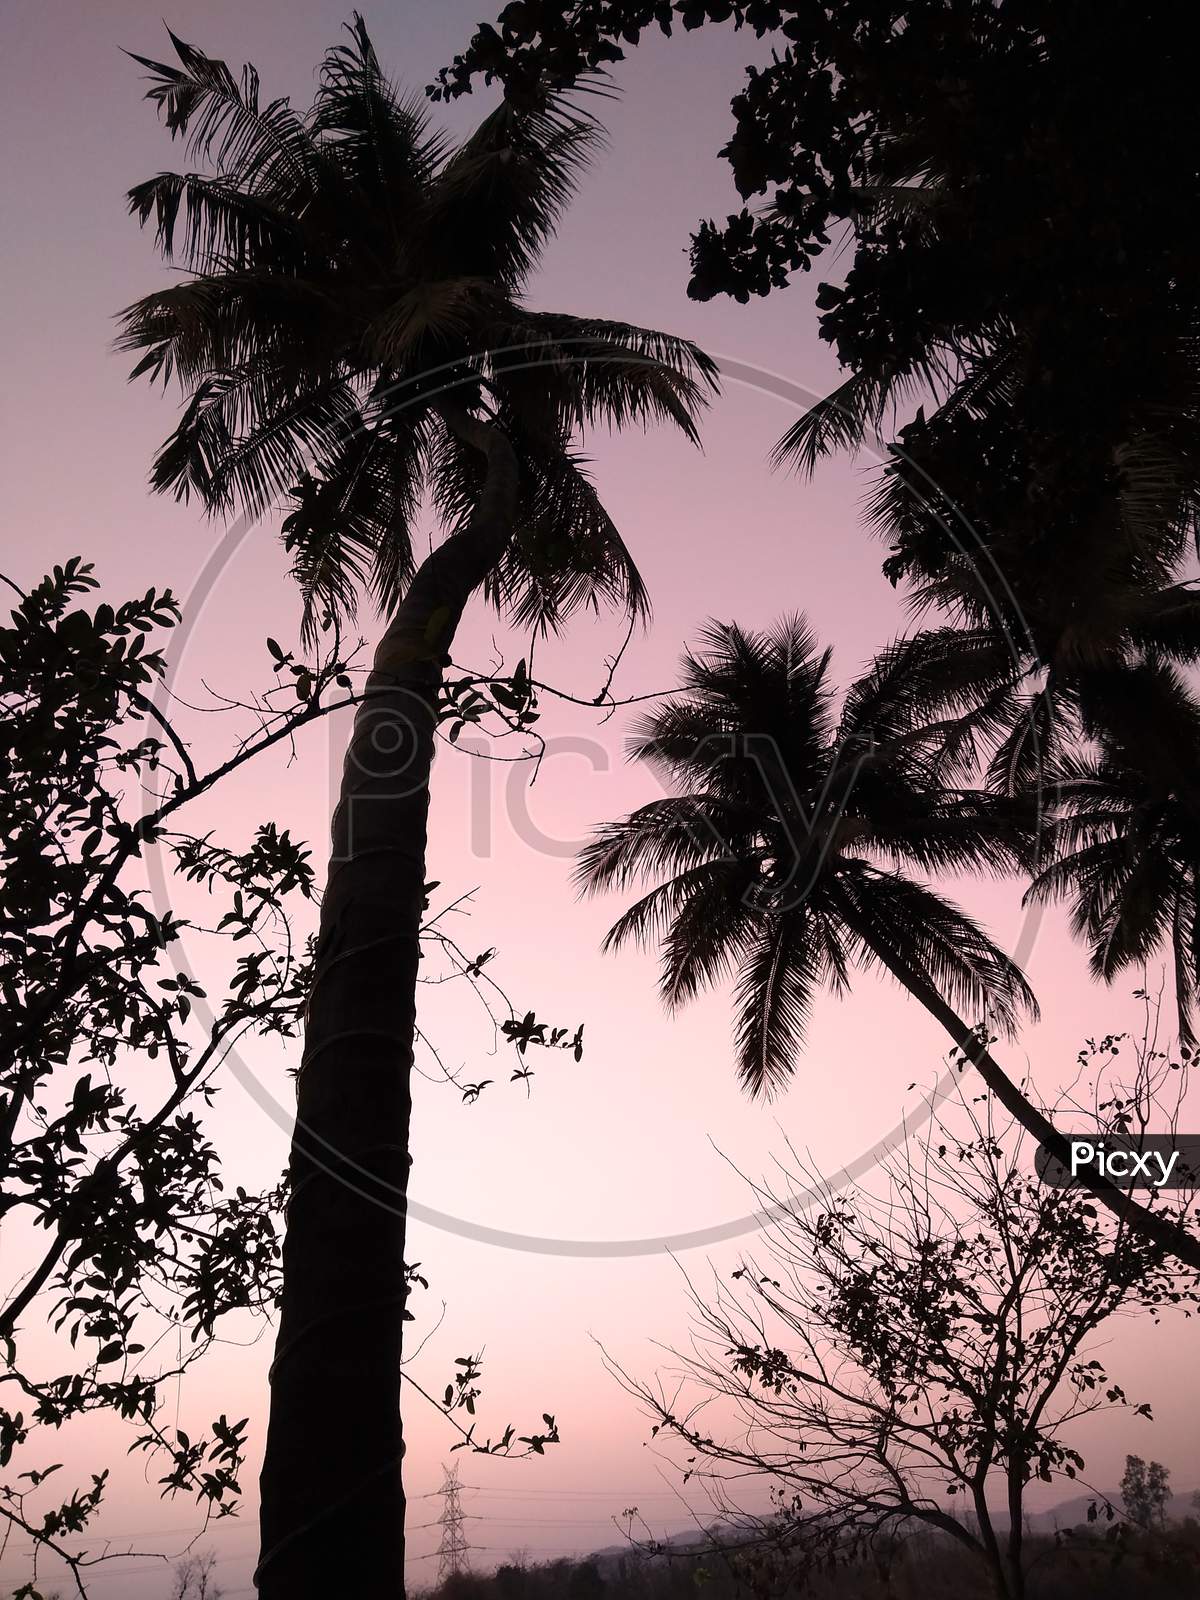 Palm Tree Silhouette In Evening Time.